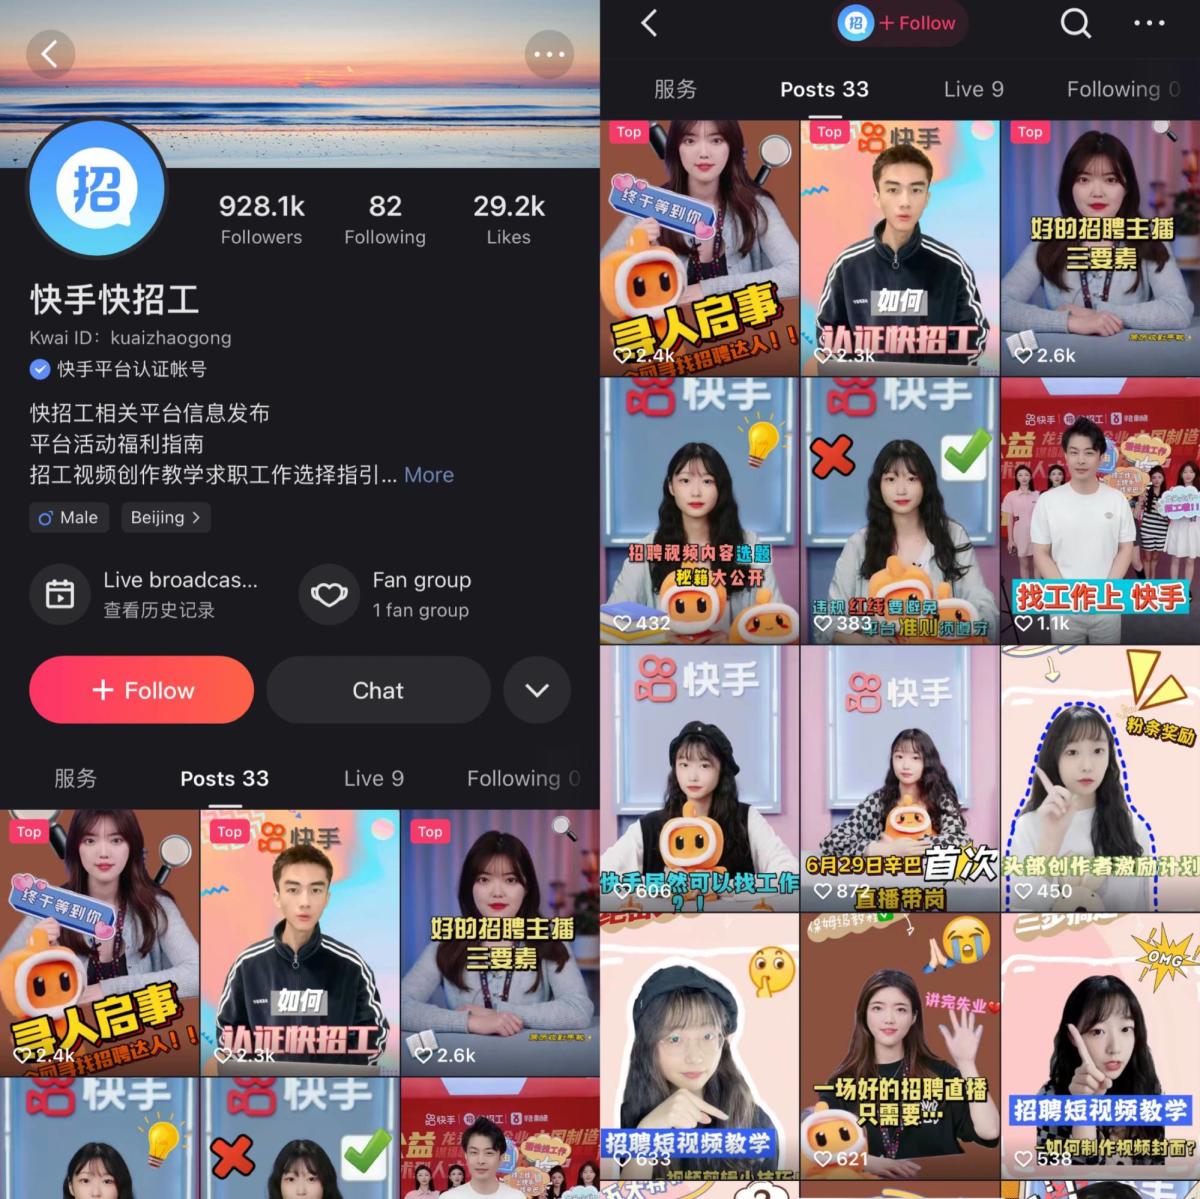 A Well-known Live Streamer of China's Short Video Platform Kwai